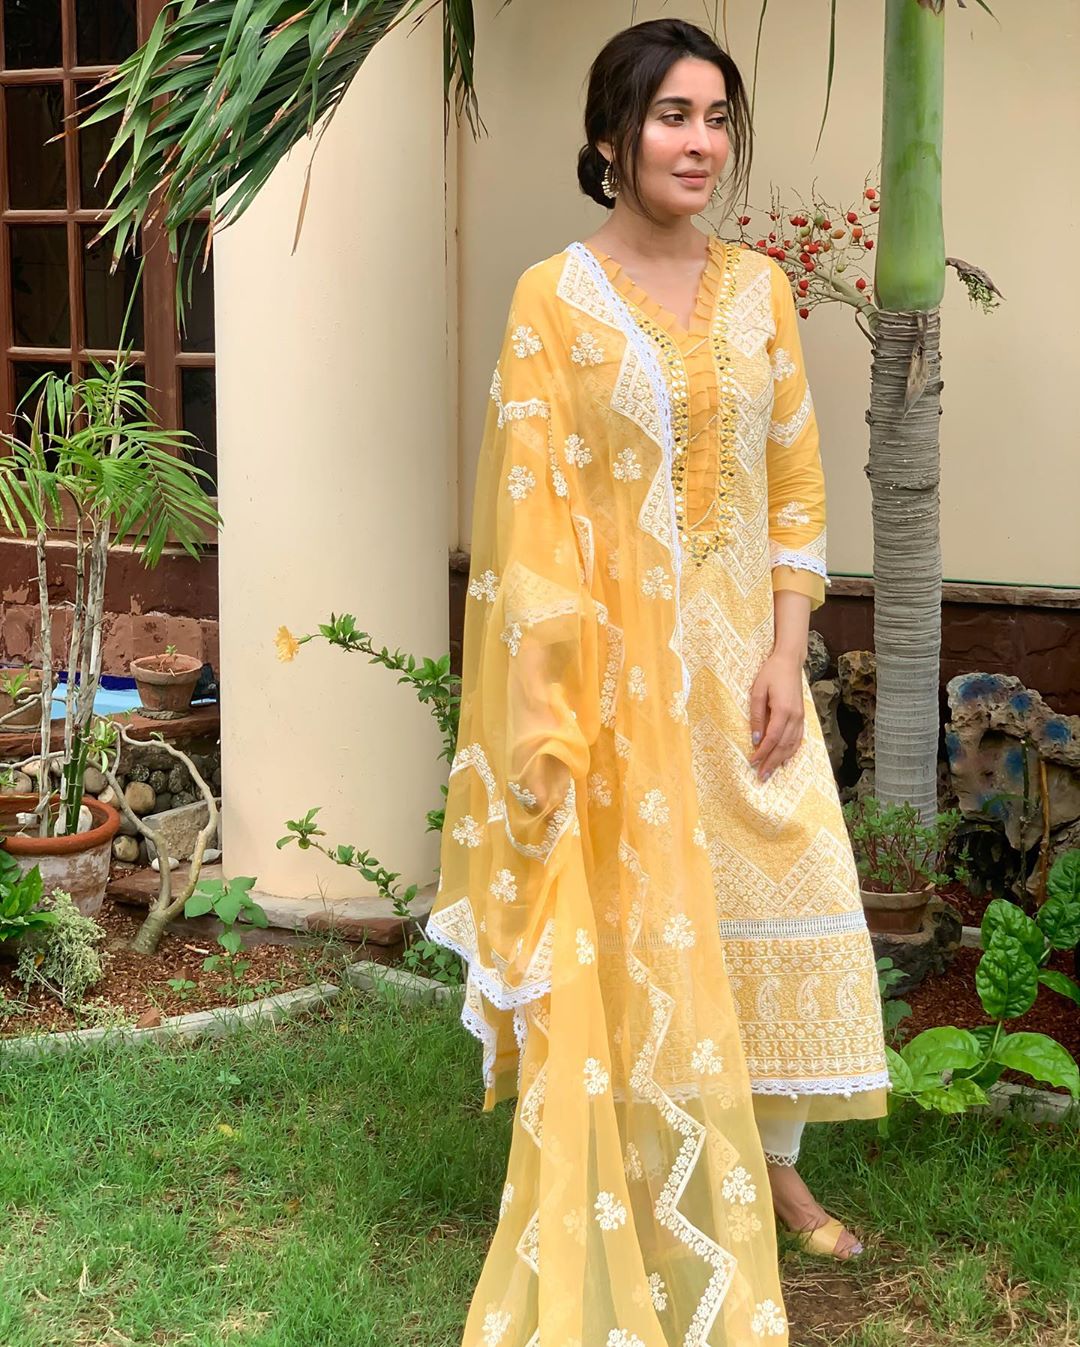 Dr.Shaista Lodhi Looking Gorgeous in her Latest Pictures | Reviewit.pk